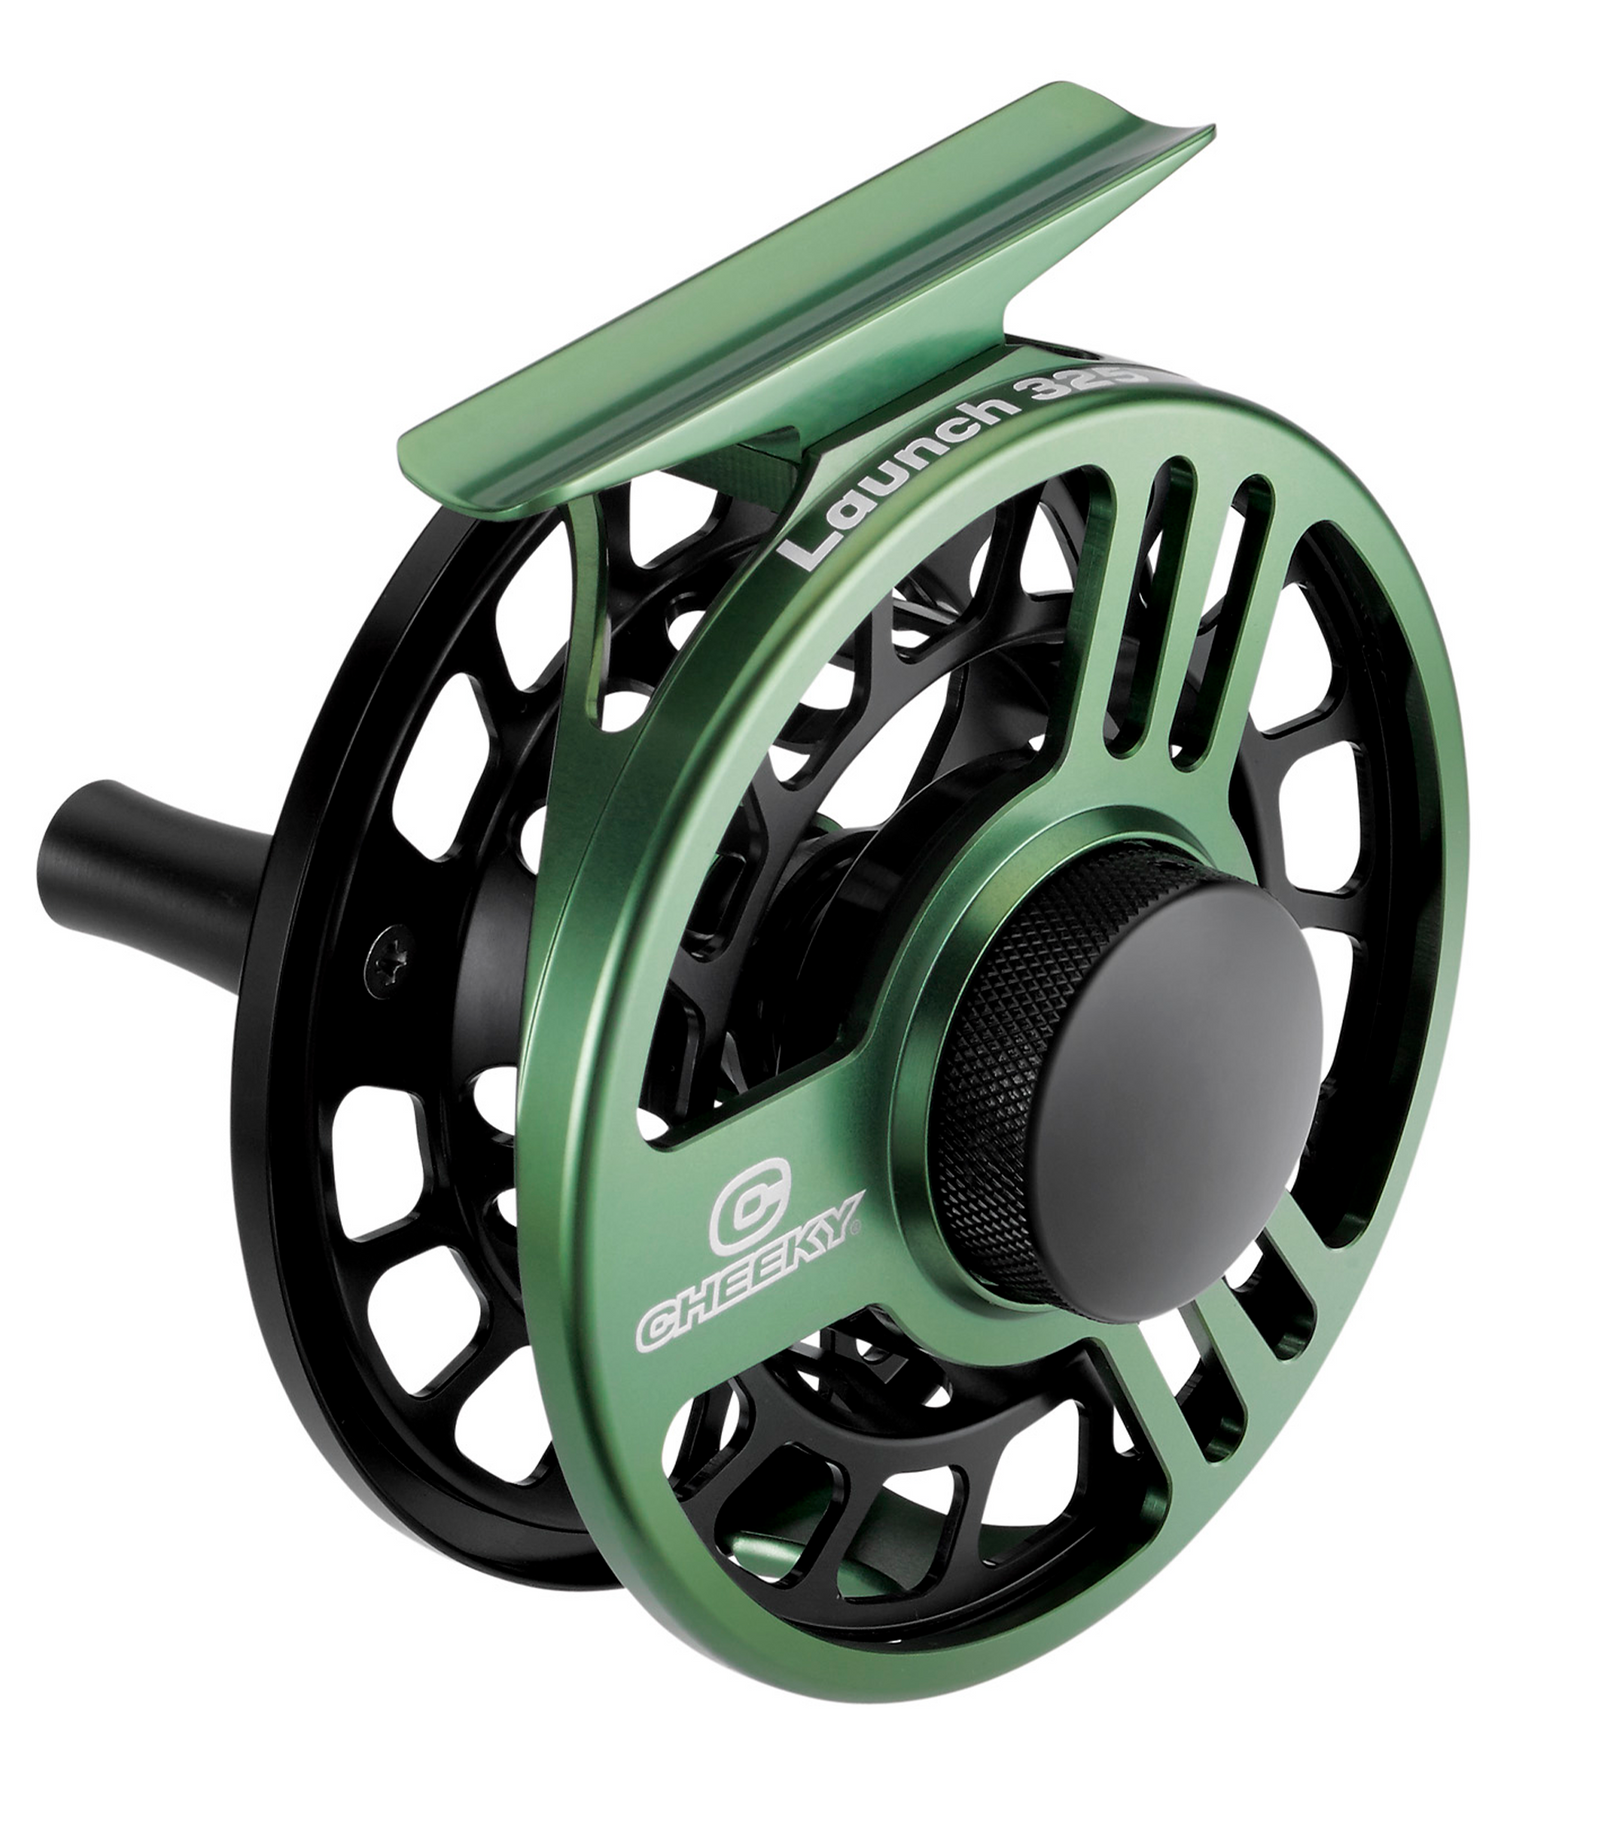 Fly Fishing Deals for Black Friday